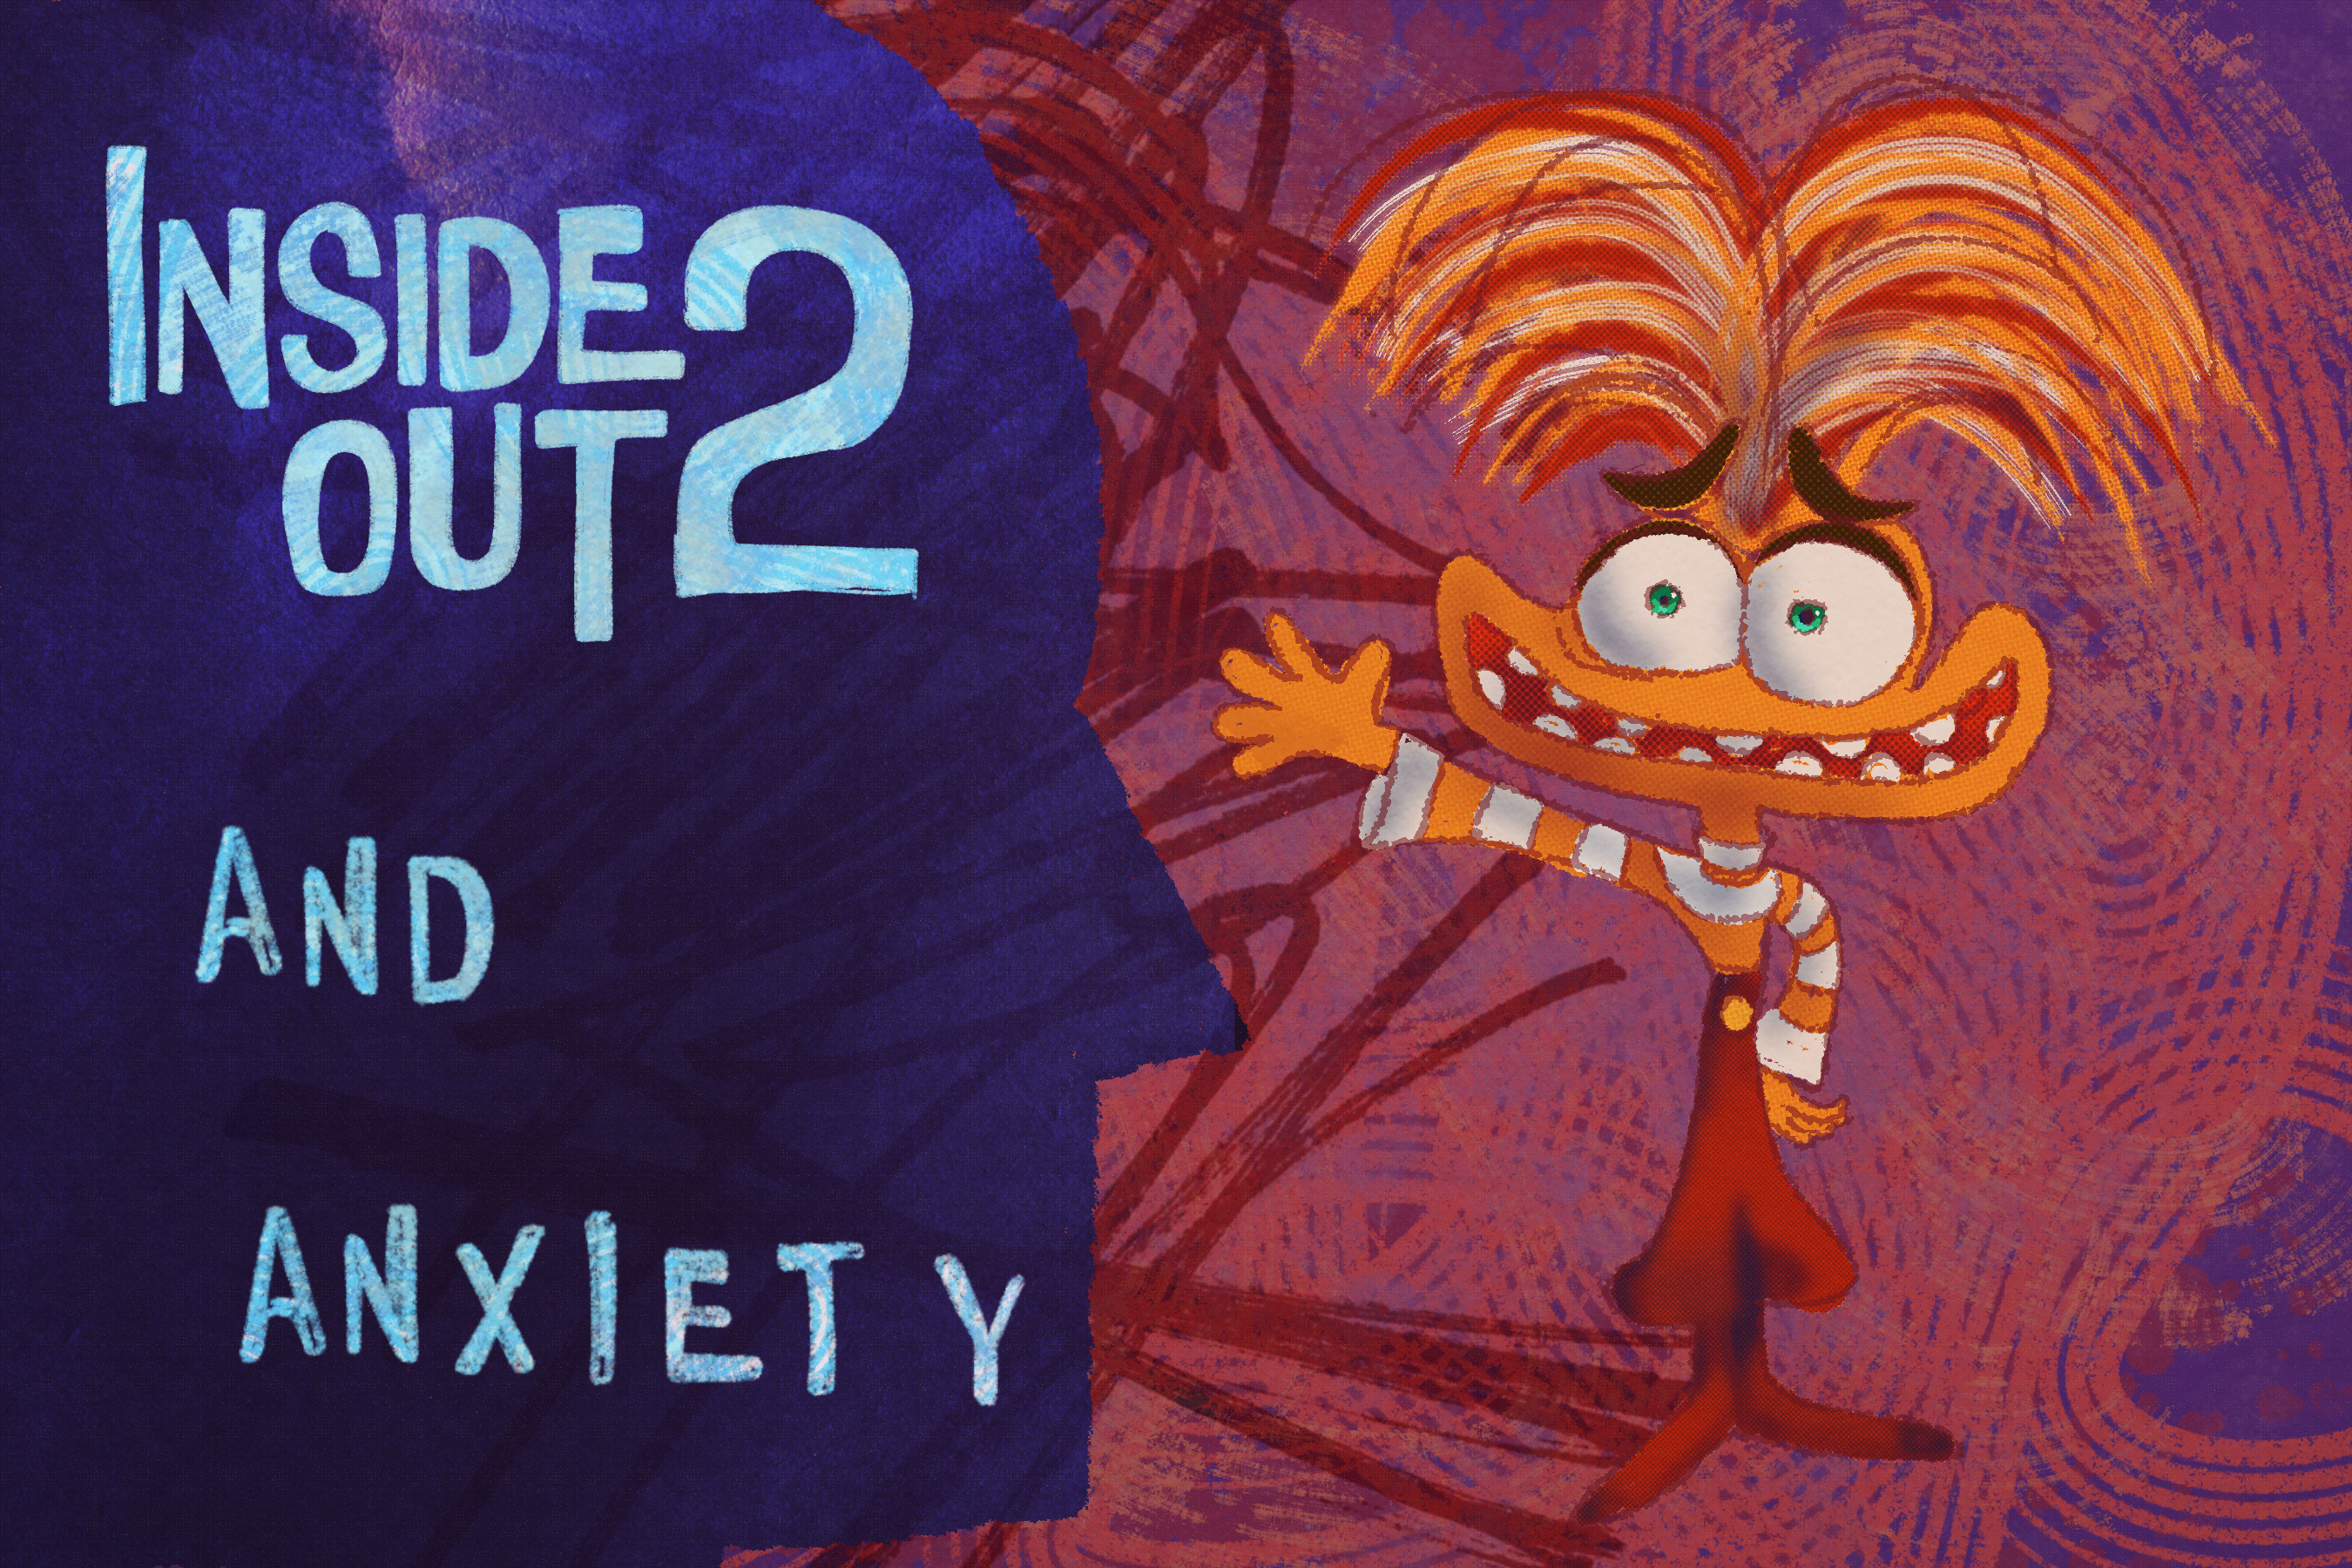 What the Introduction of 'Inside Out's Anxiety Could Mean - Study